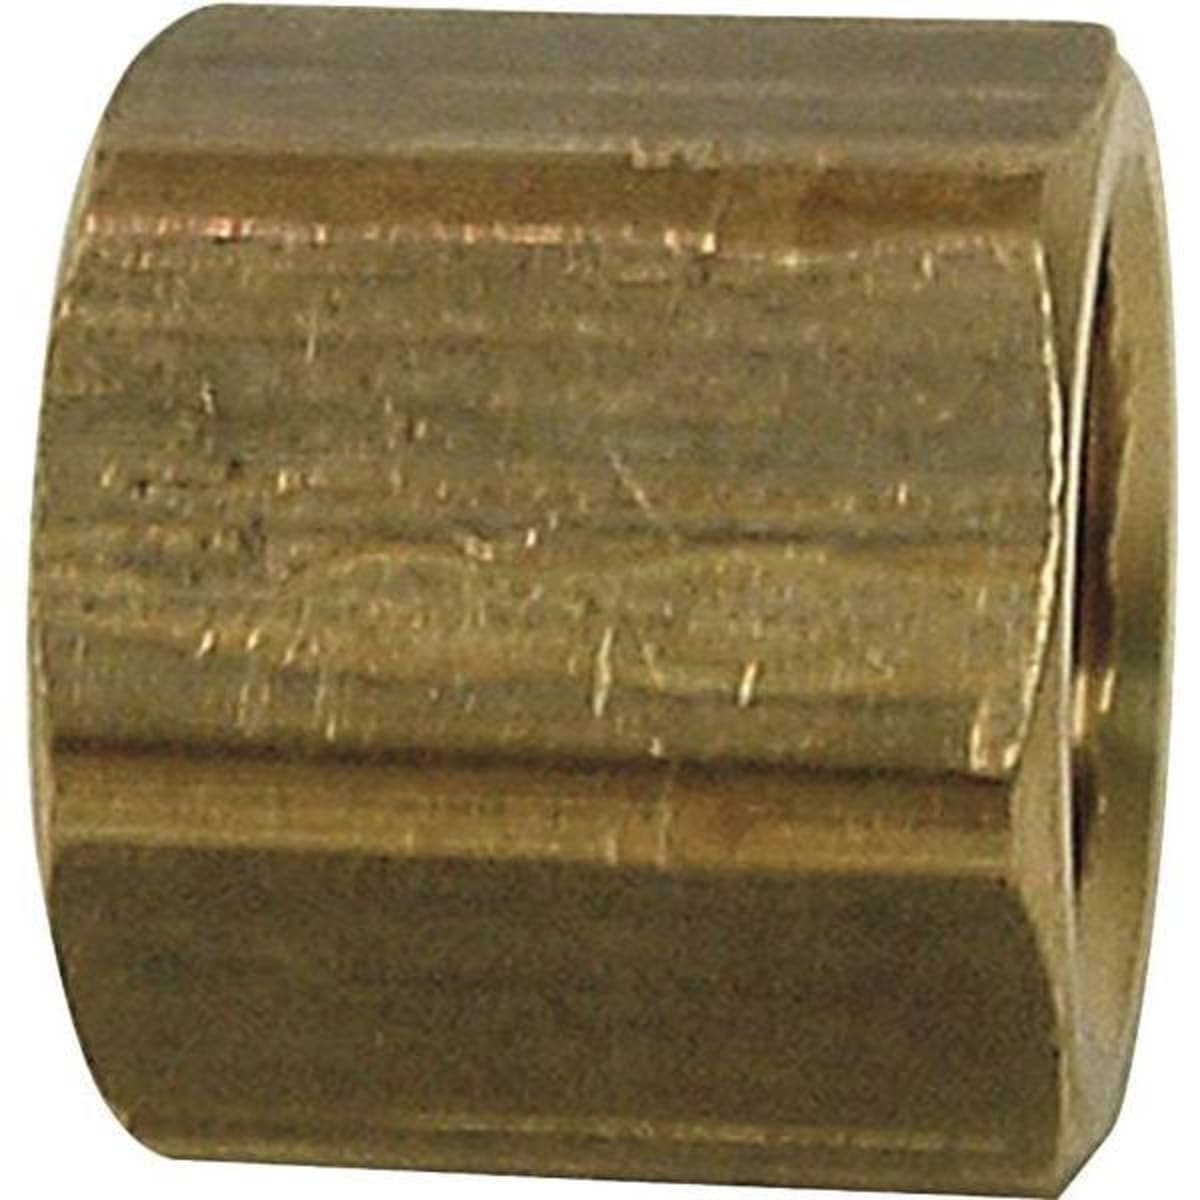 Sioux Chief 3/8 inch Chrome-Plated Brass Compression Nuts with